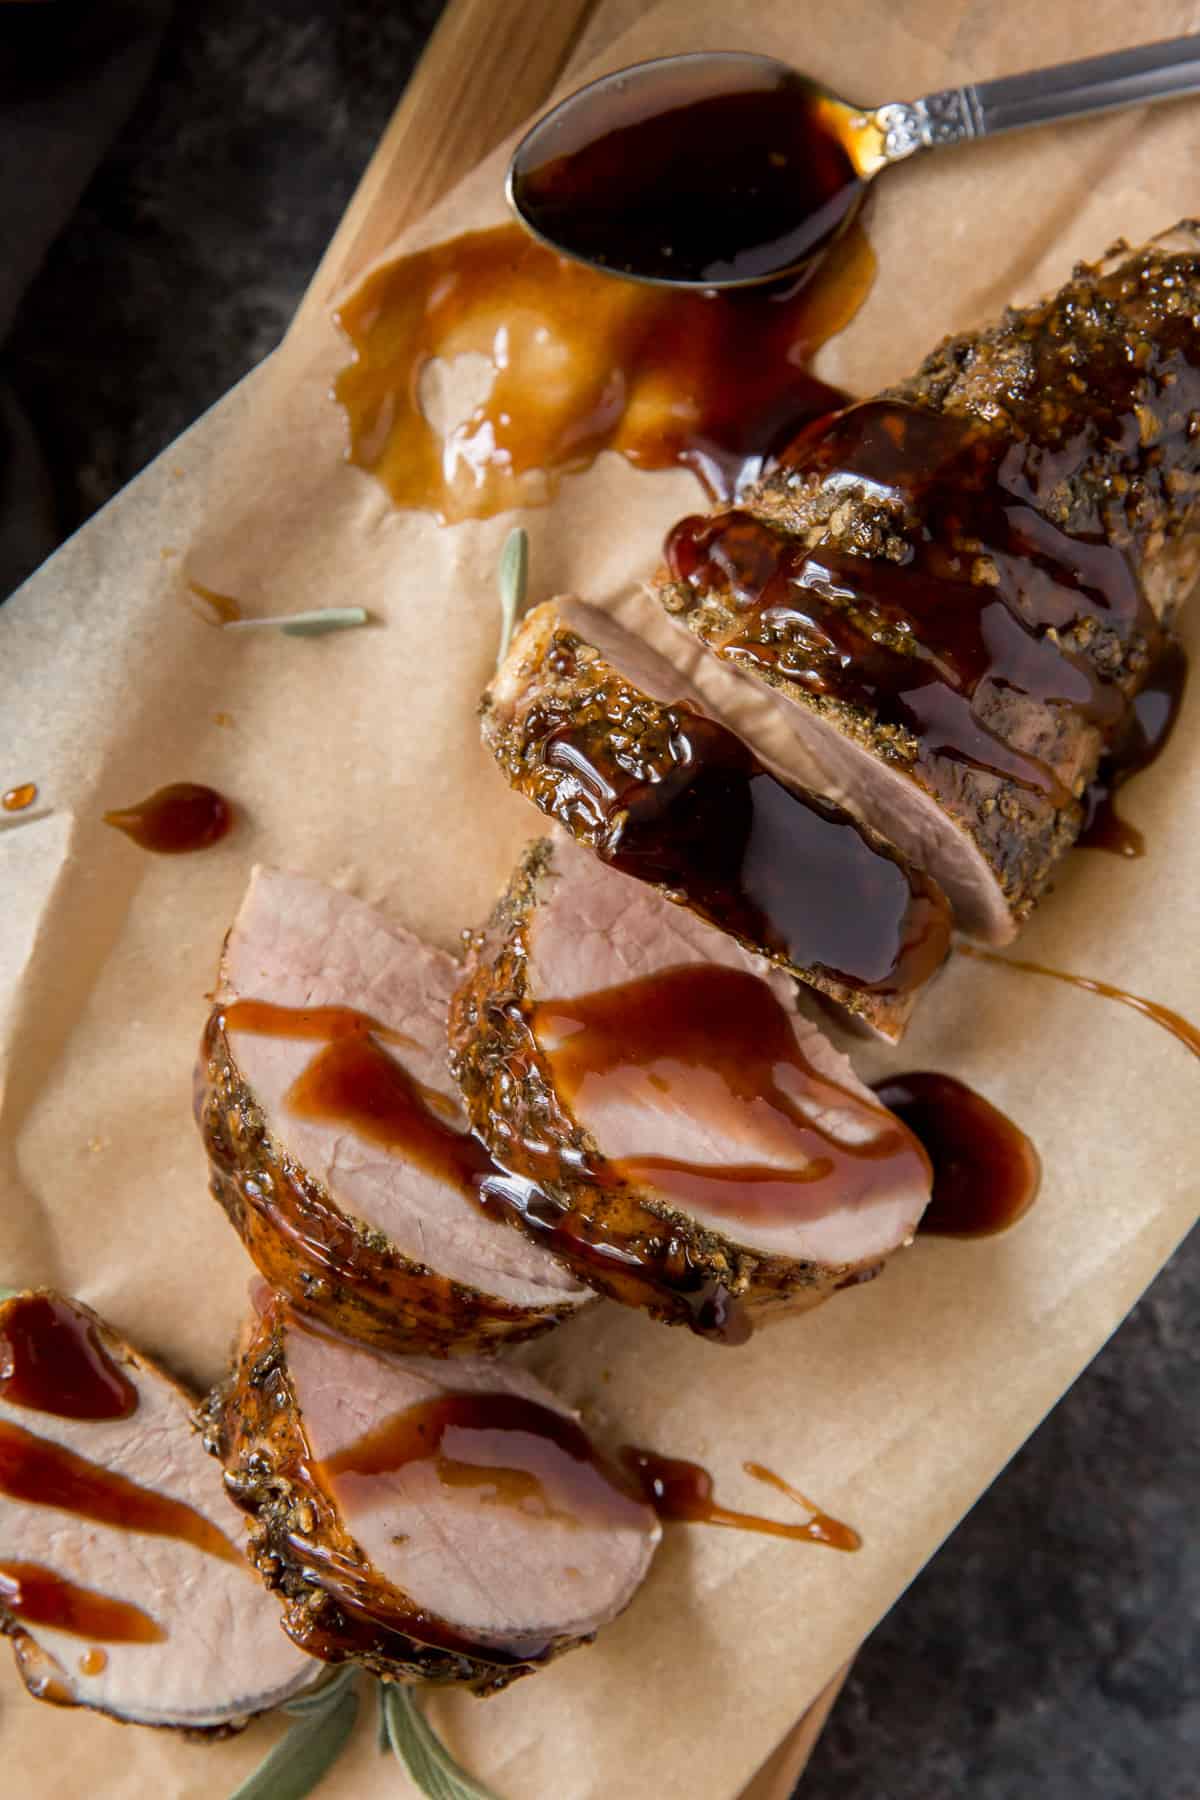 Sliced pork tenderloin drizzled with balsamic glaze on a parchment paper lined board.